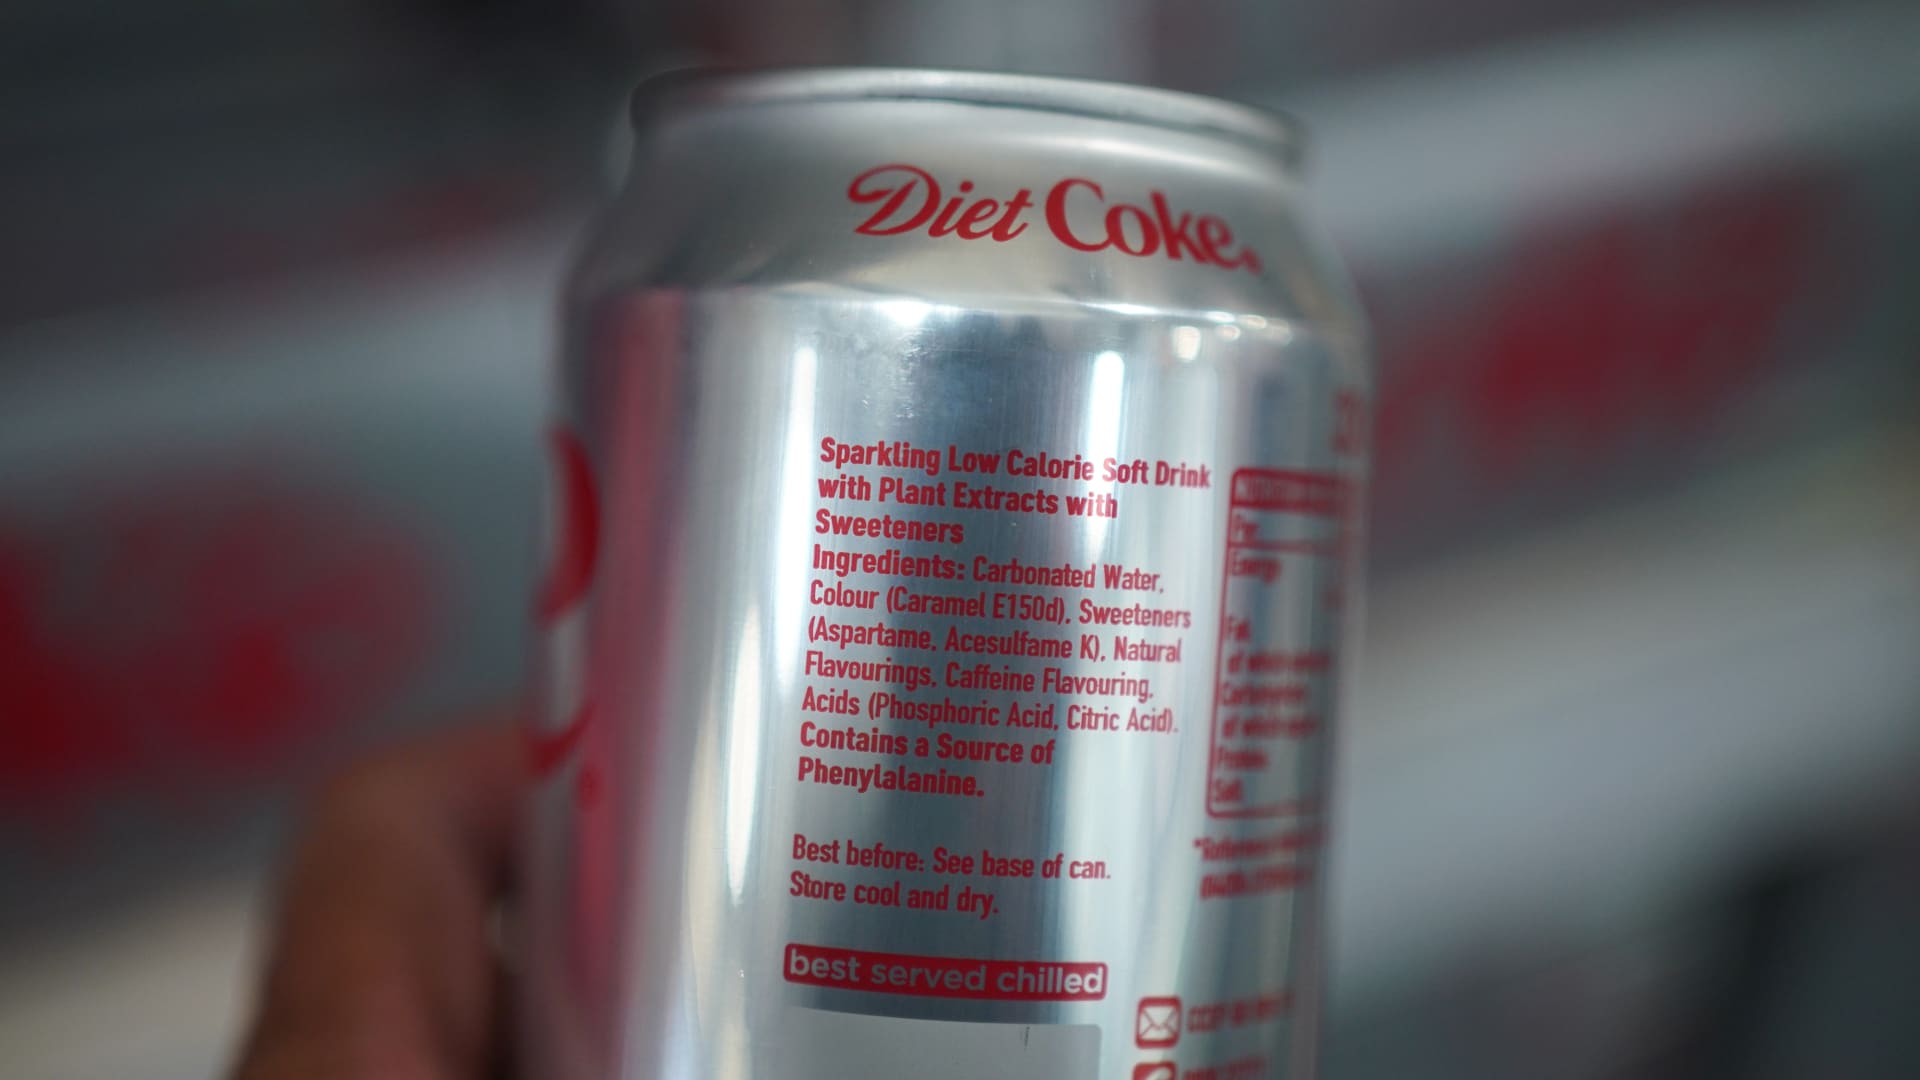 WHO says soda sweetener aspartame may cause cancer, but it’s safe within limits